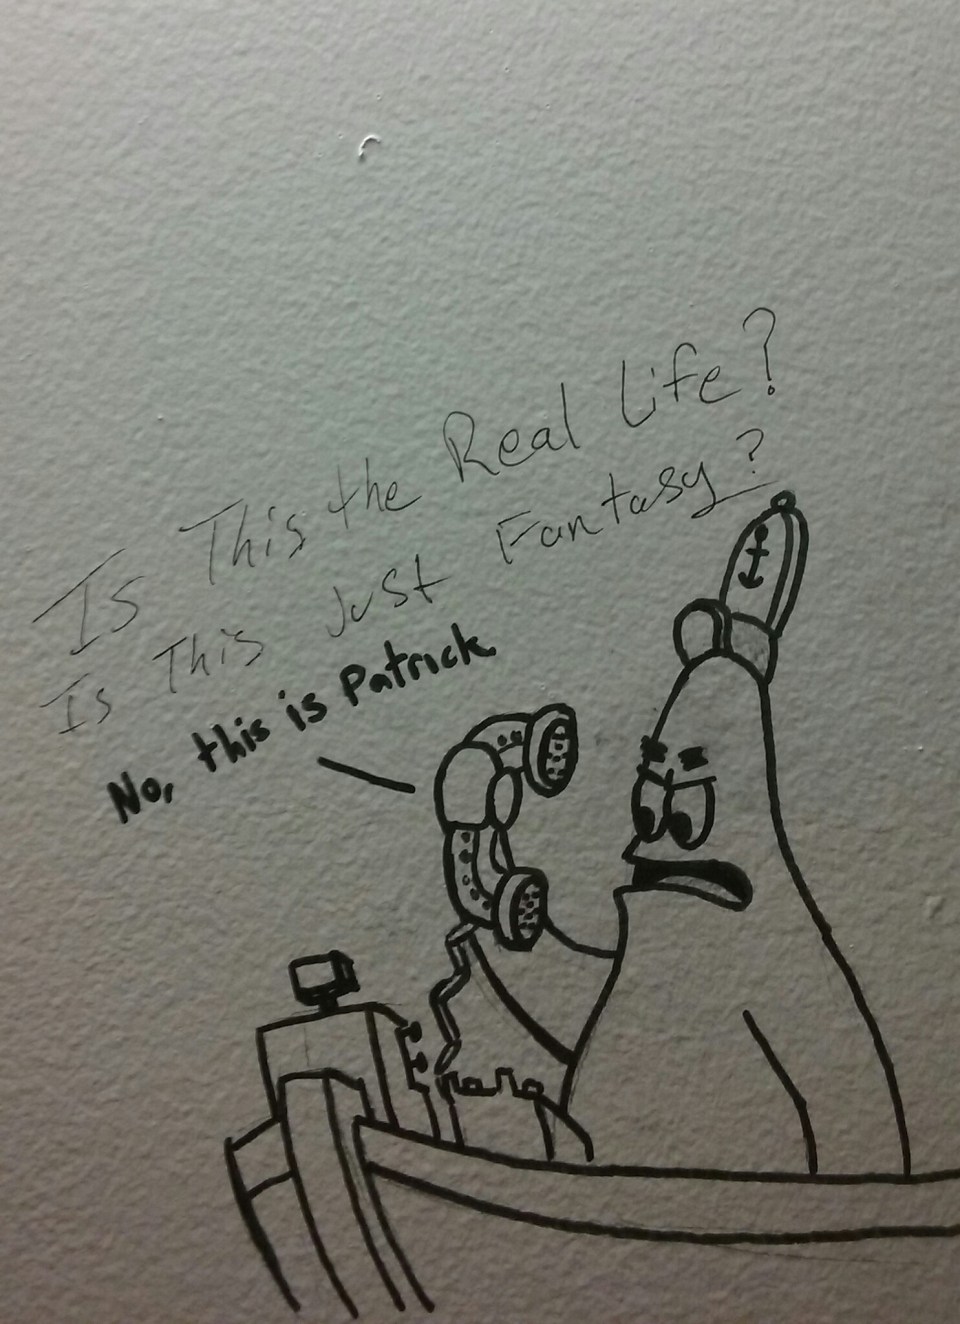 bathroom graffiti meme - Real life? Fantasy? Is this the Is This Just No, this is Patrick